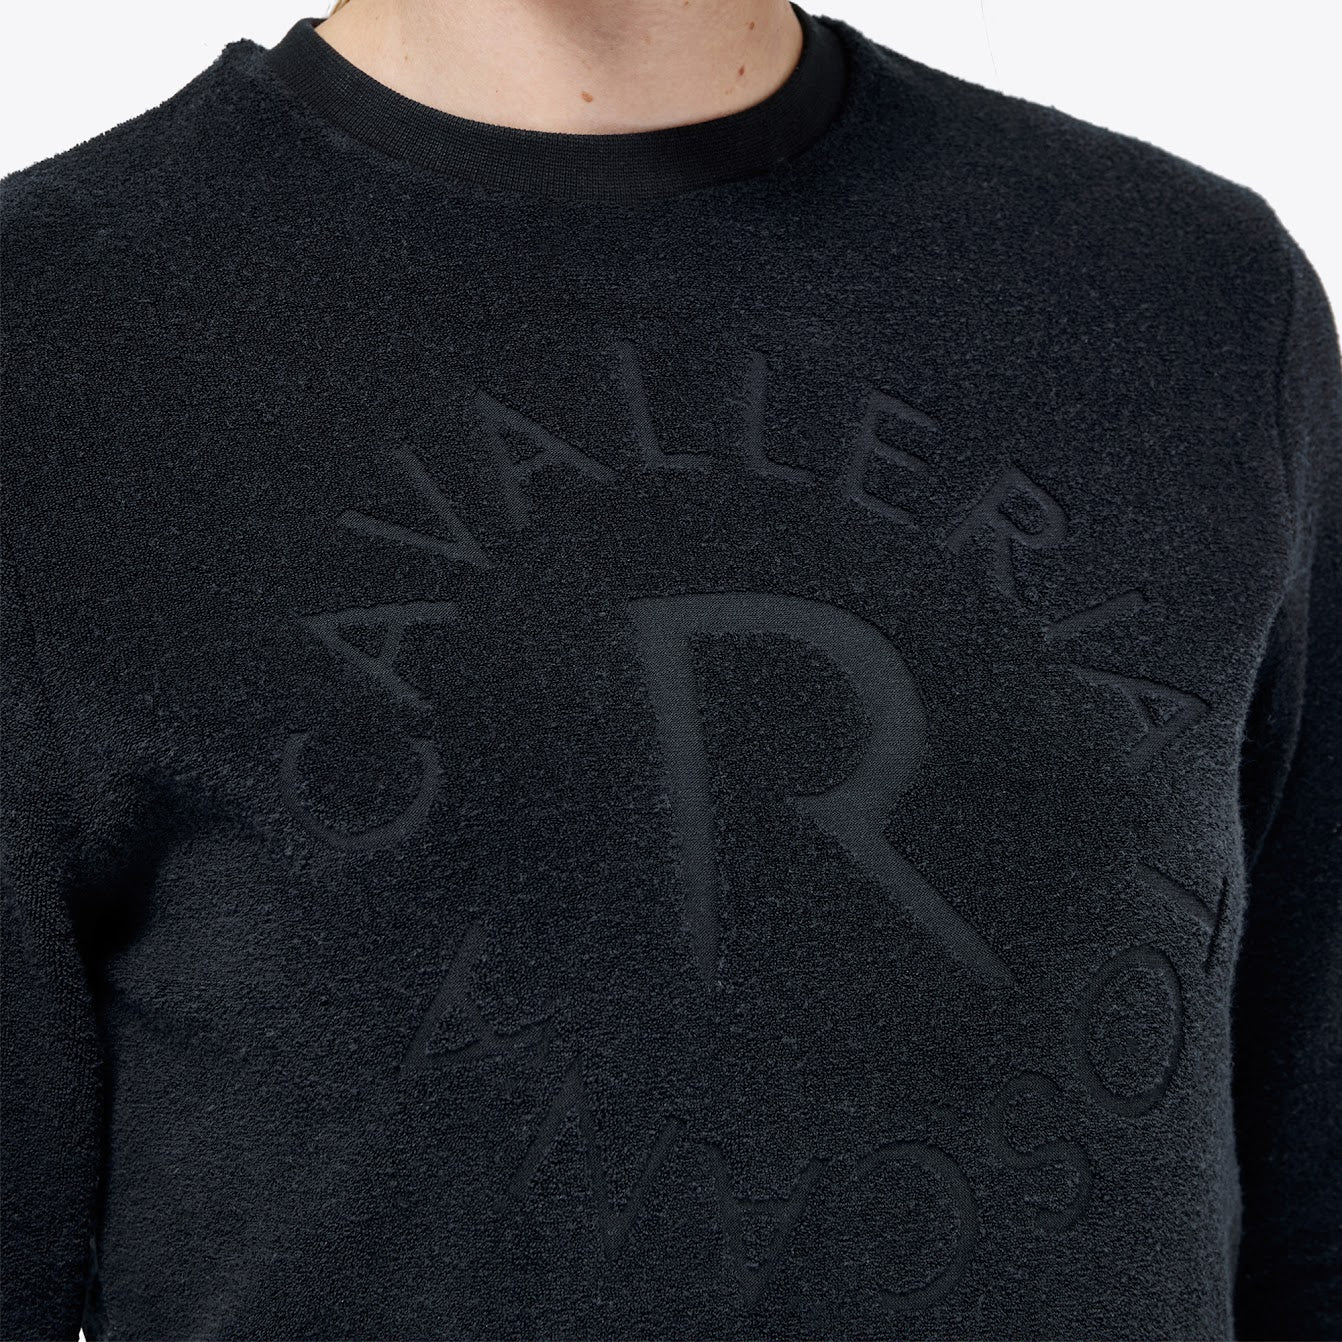 Cavalleria Toscana  Black Orbit Terry Cotton crew neck Sweatshirt is perfect for the yard or at shows. Soft luxurious fabric with the CT orbit logo on the front. 